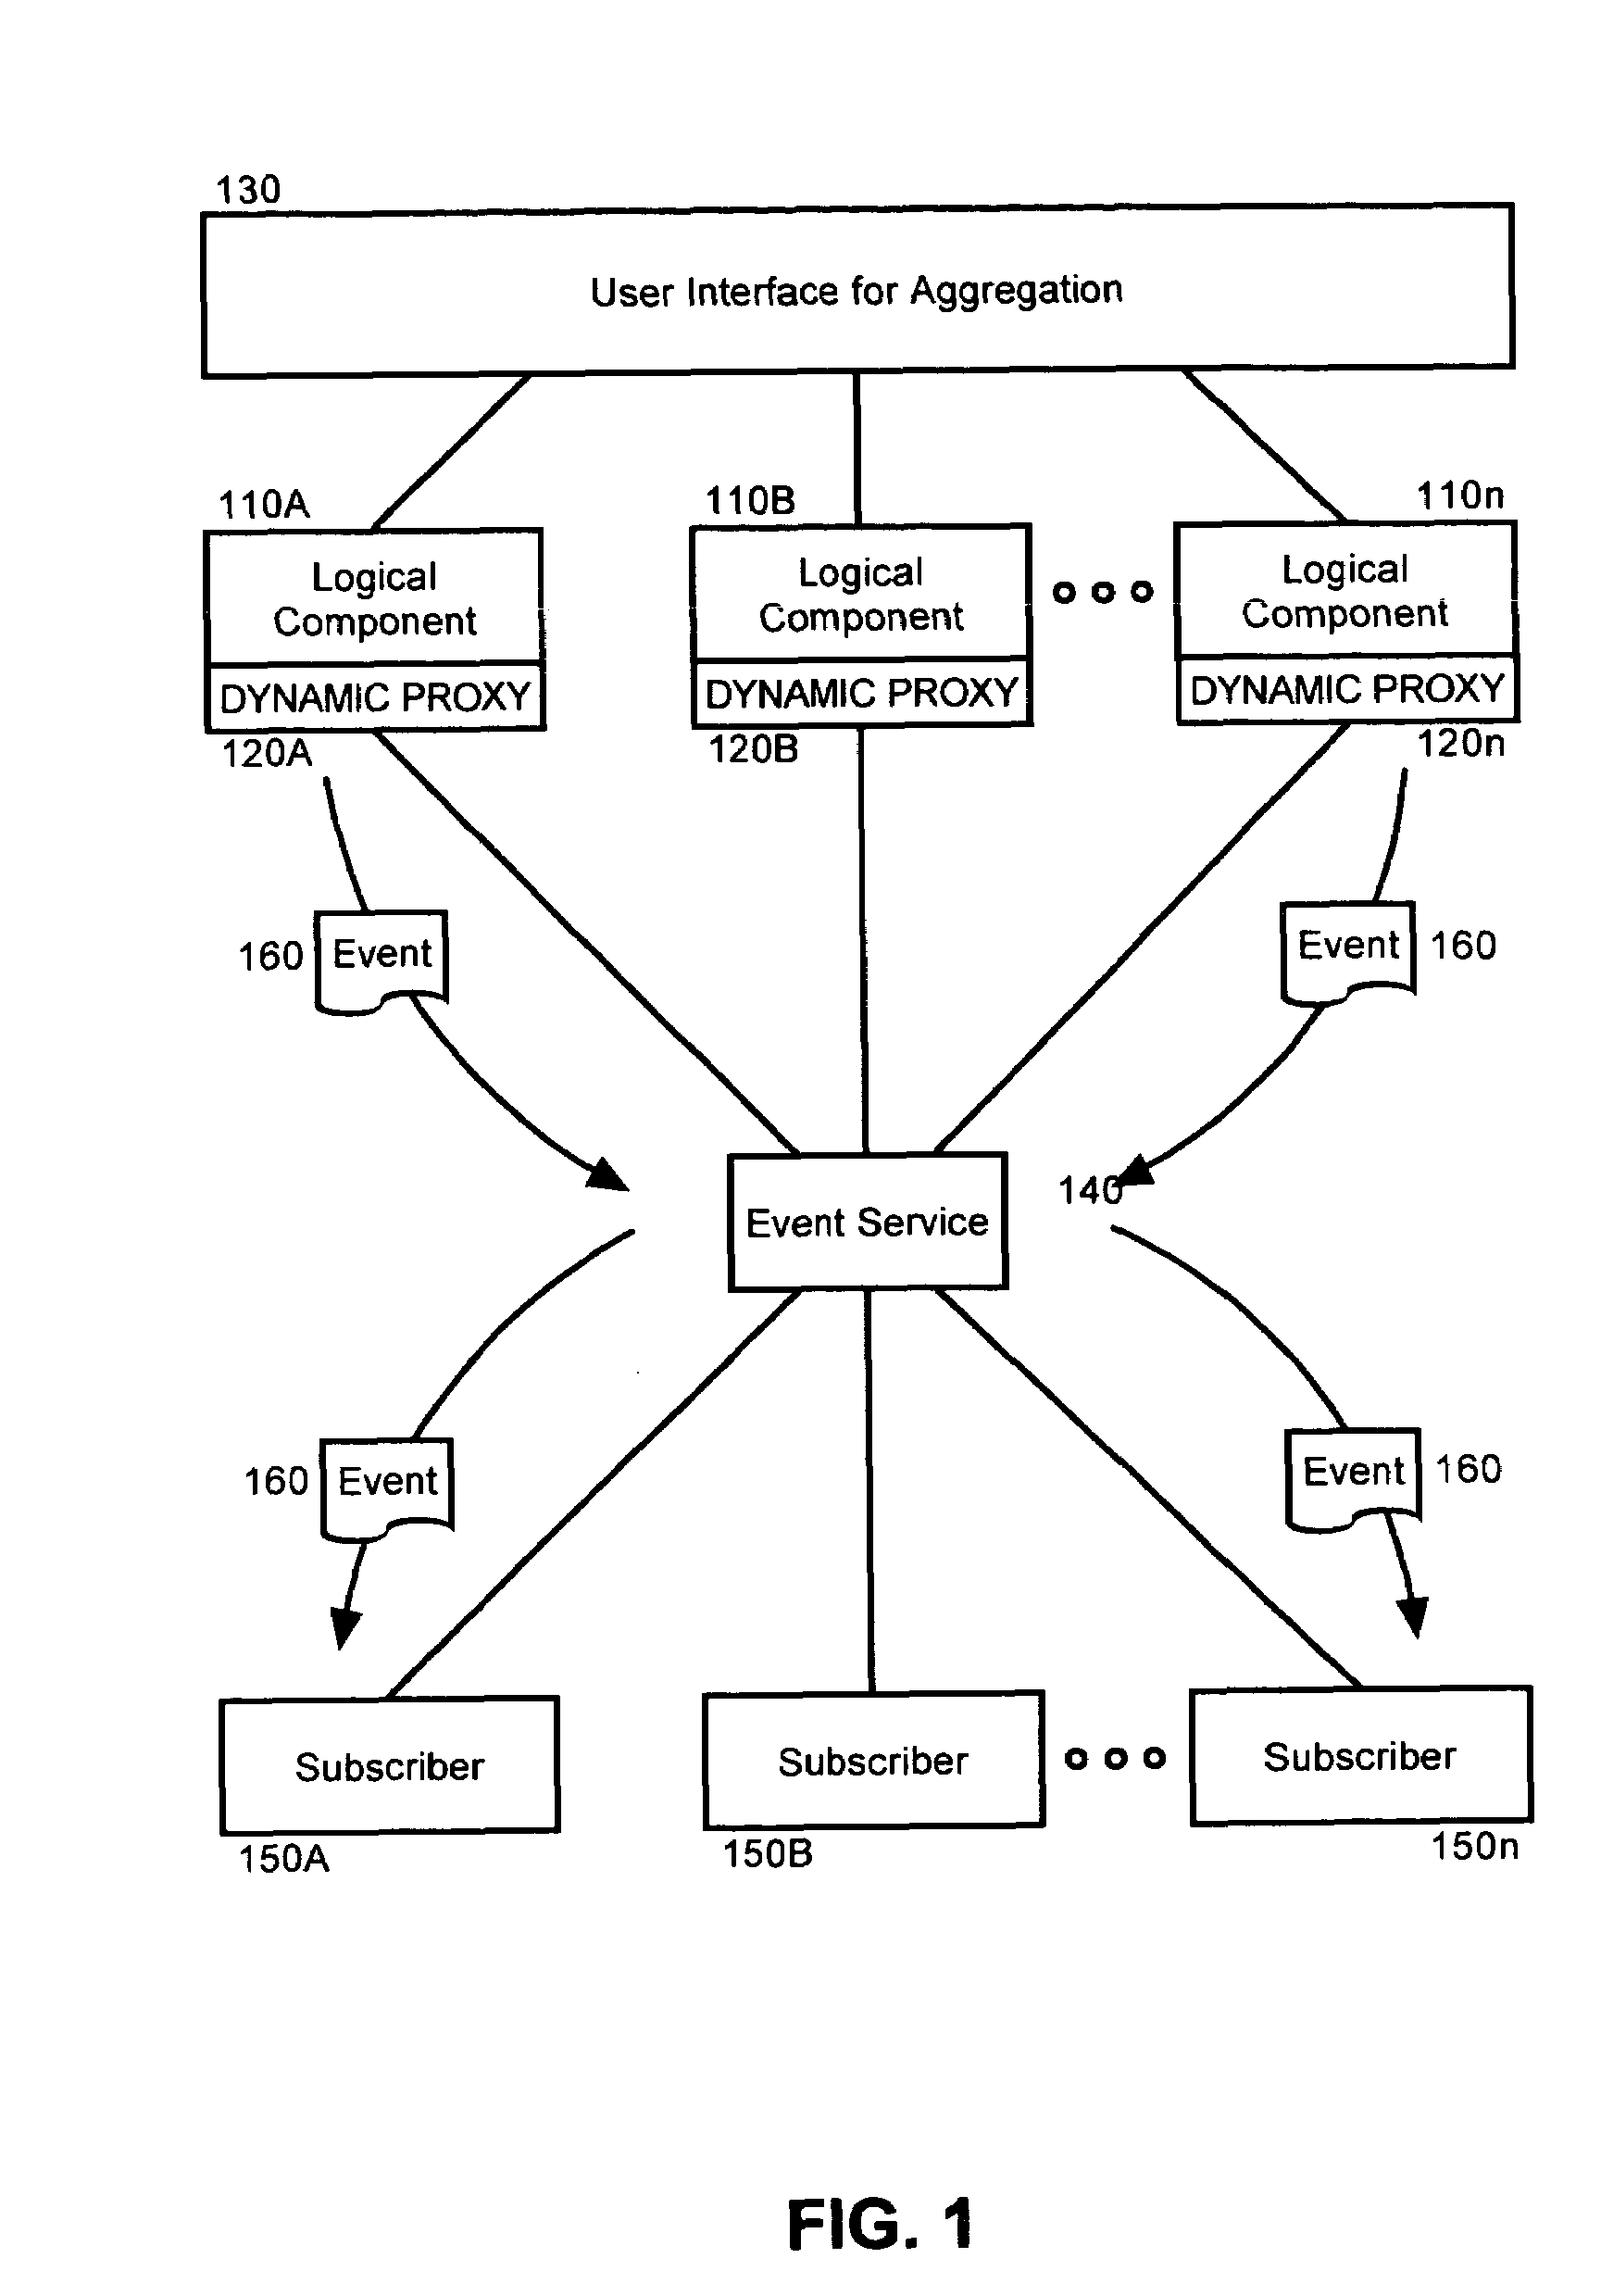 Event notification structure for dynamically aggregated logical components